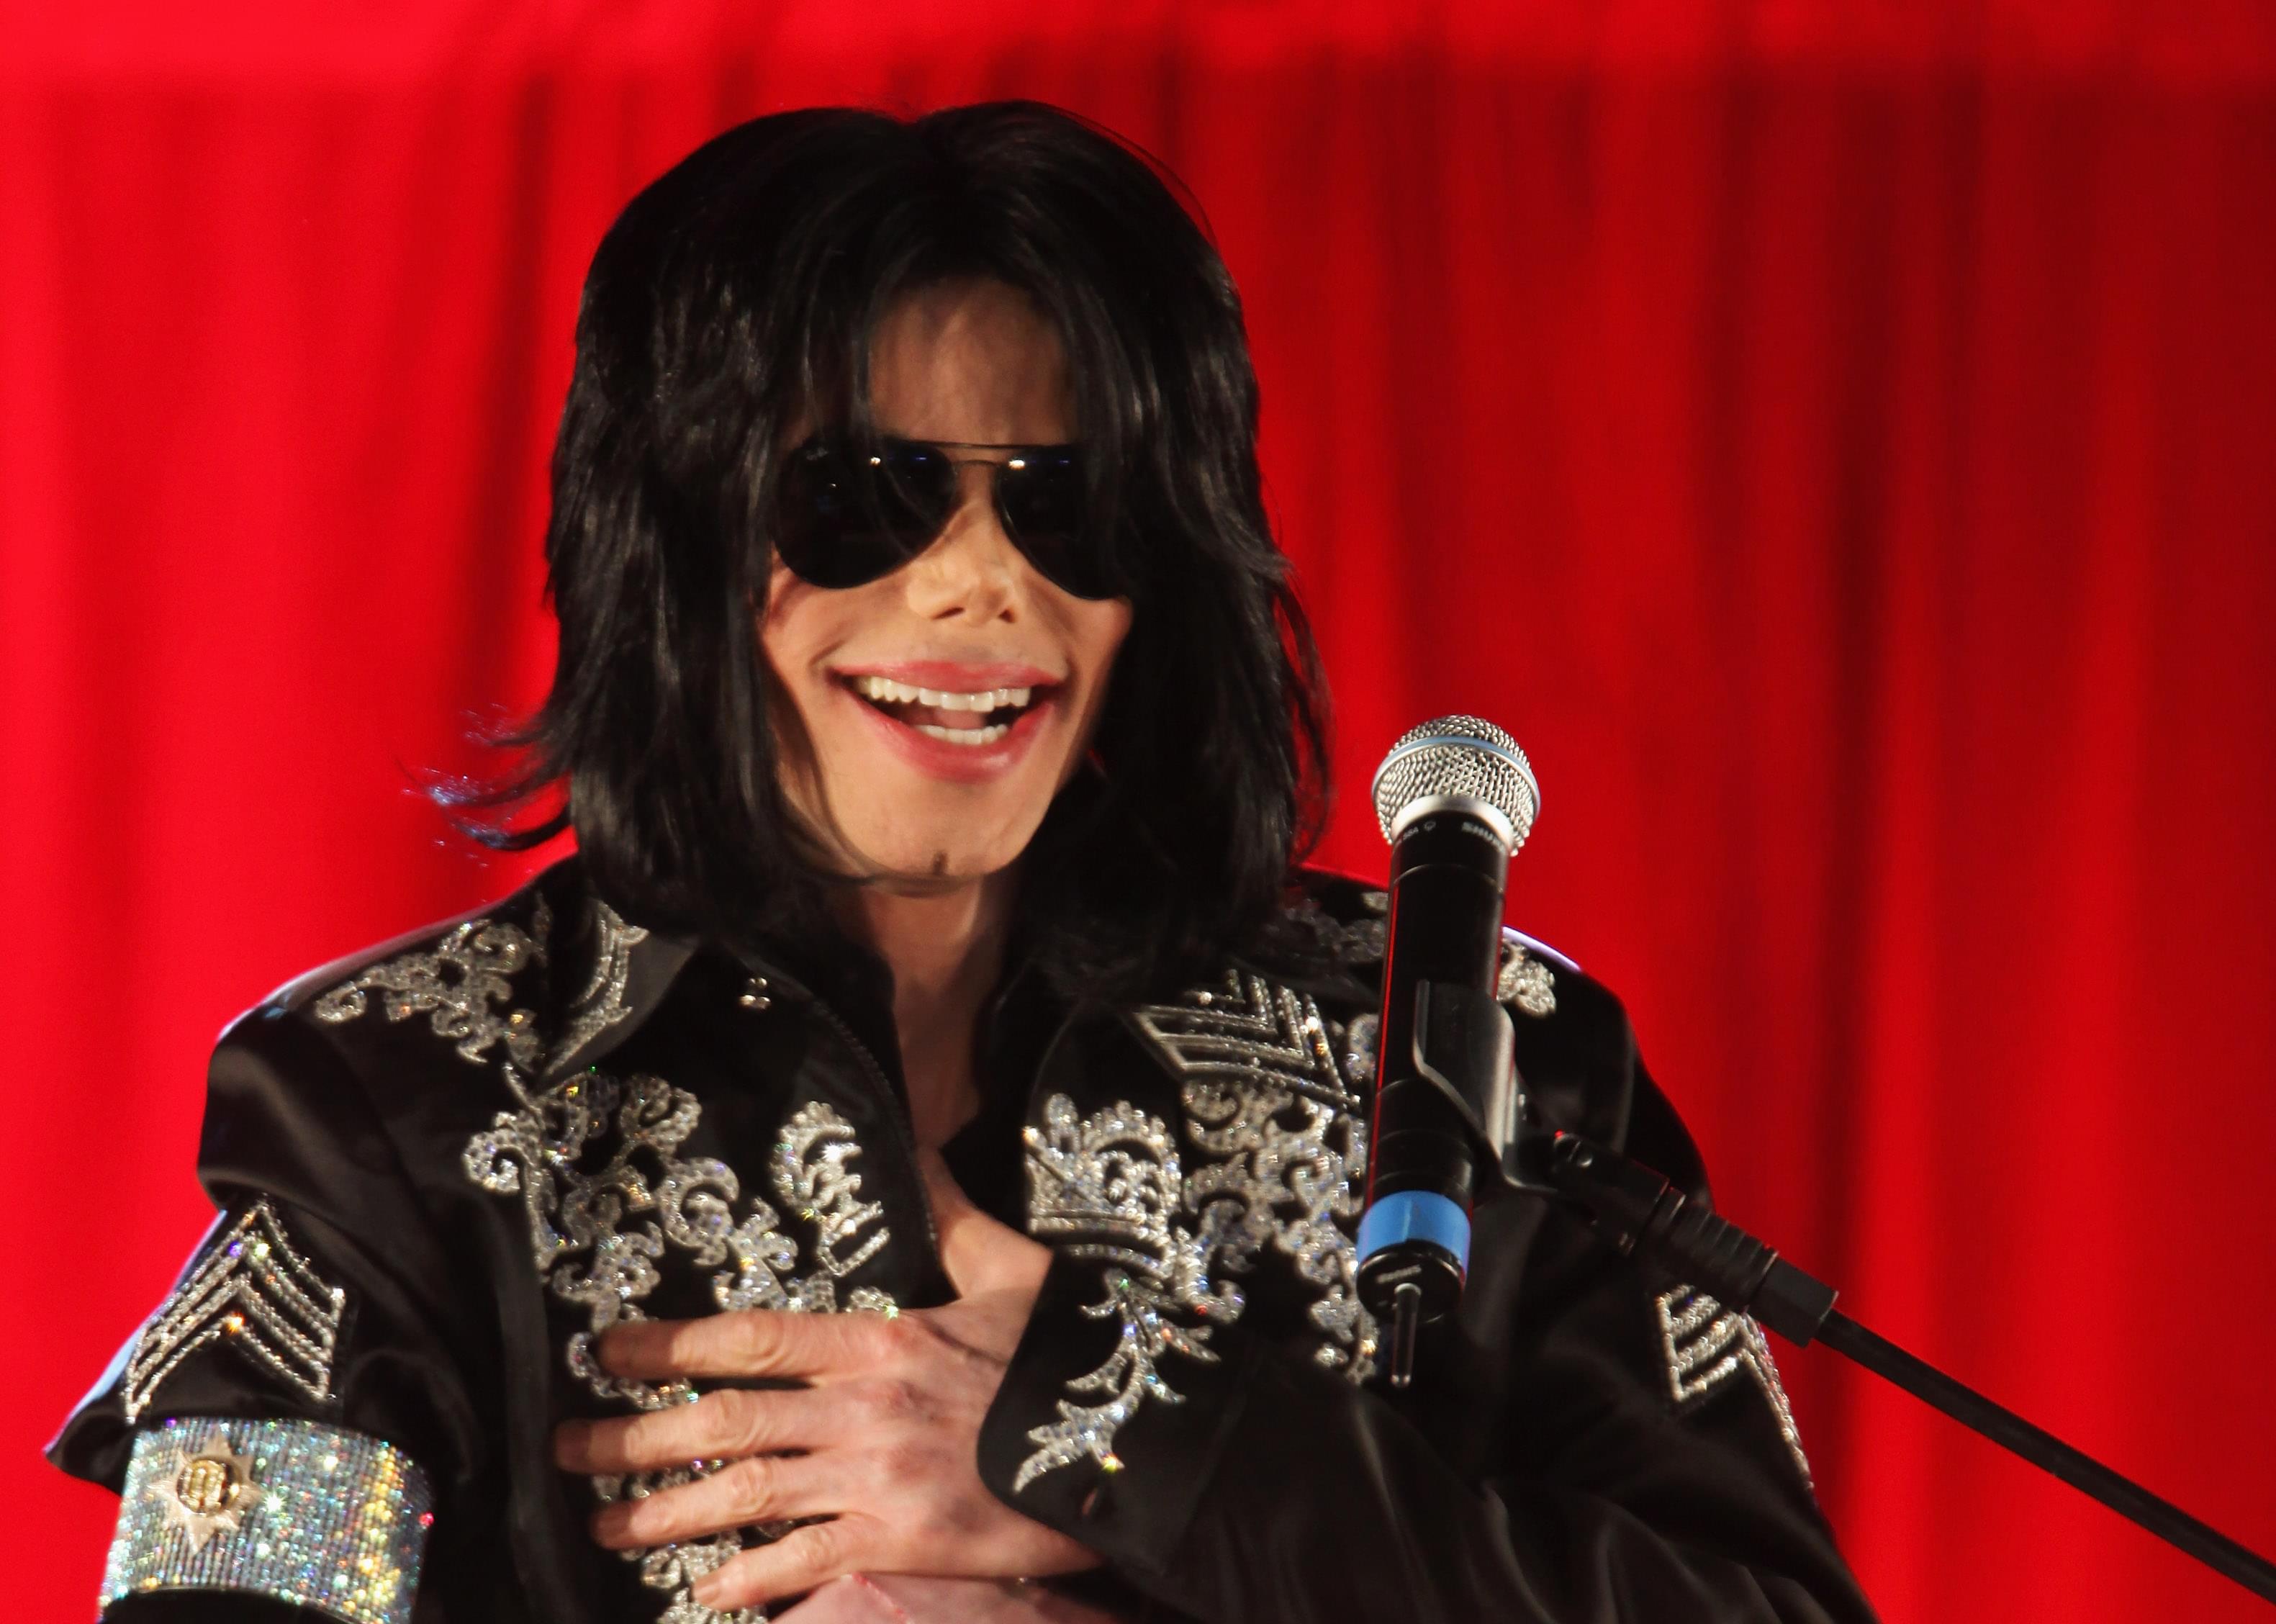 Court Rules: Sony Music Allowed to Sell Michael Jackson Songs Even If They’re Fake